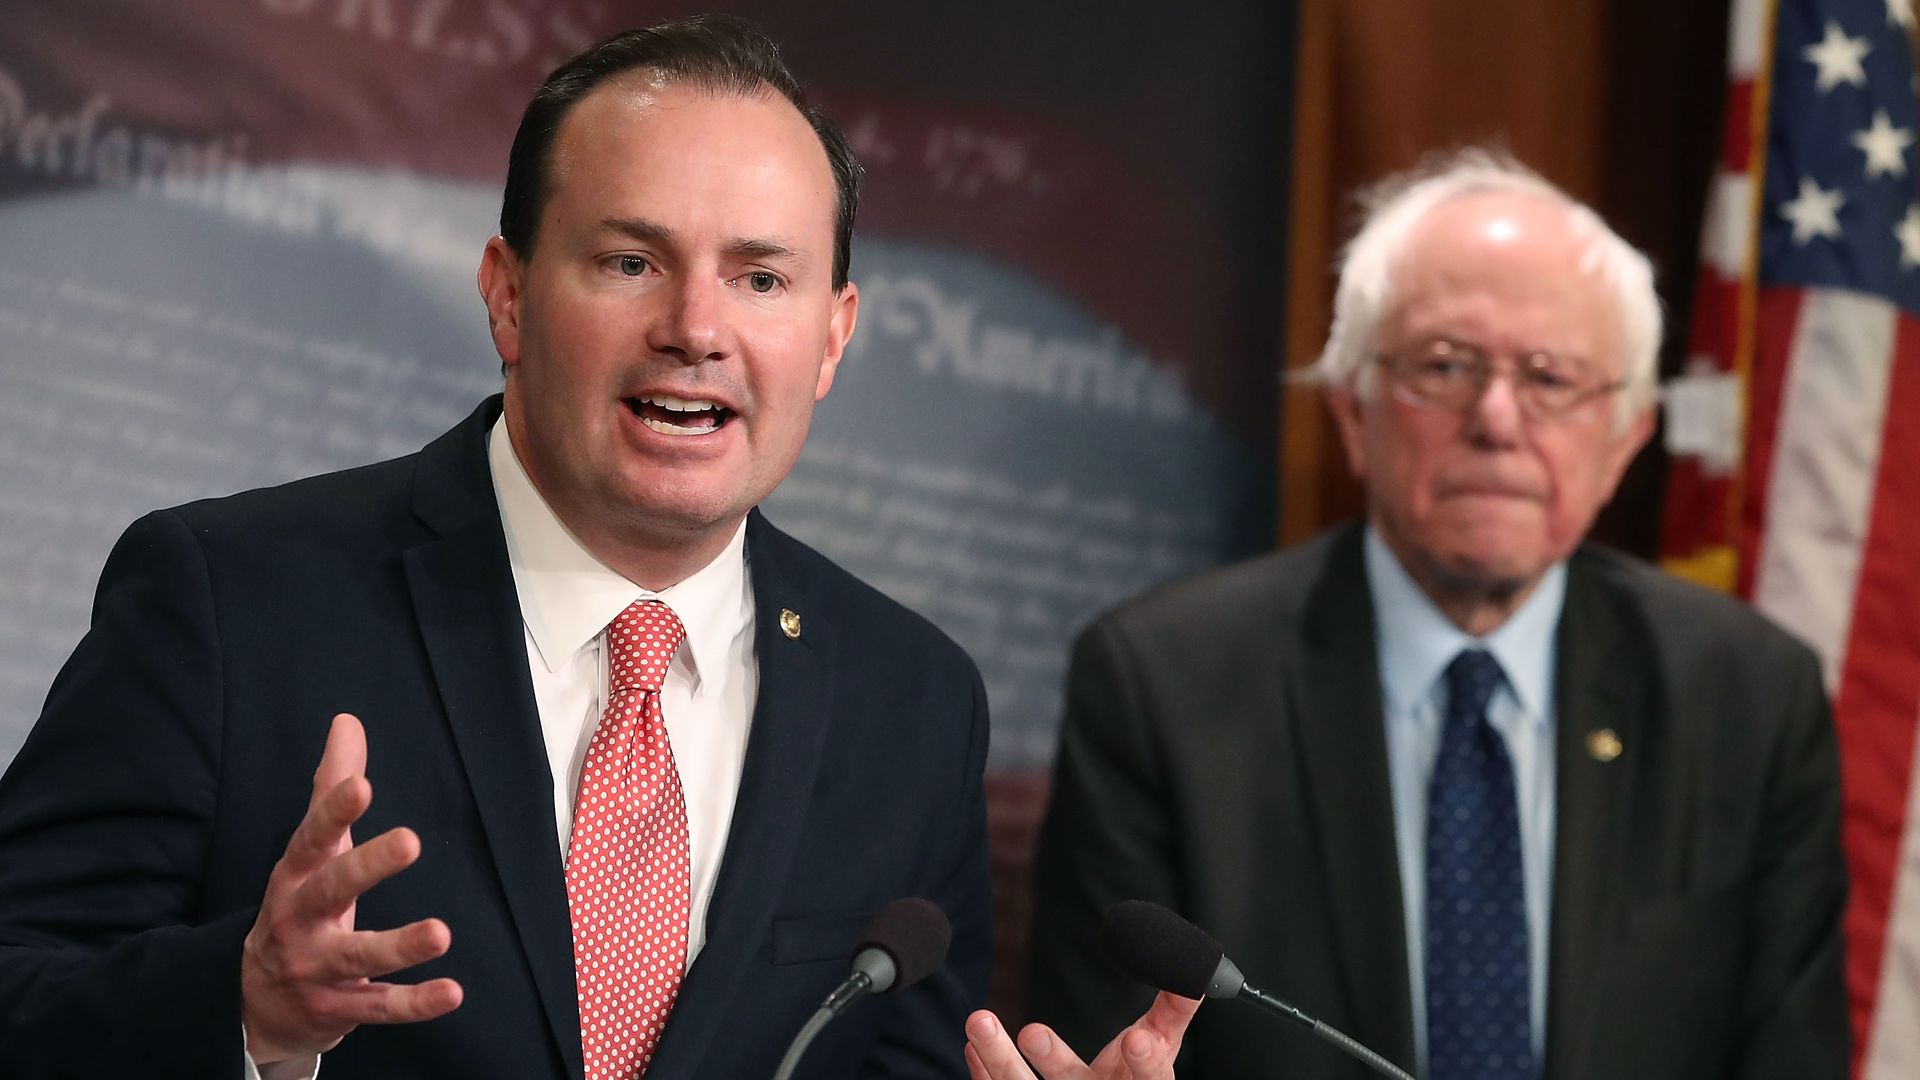 Sen. Mike Lee and Sen. Bernie Sanders introduce a joint resolution to remove U.S. armed forces from Yemen.